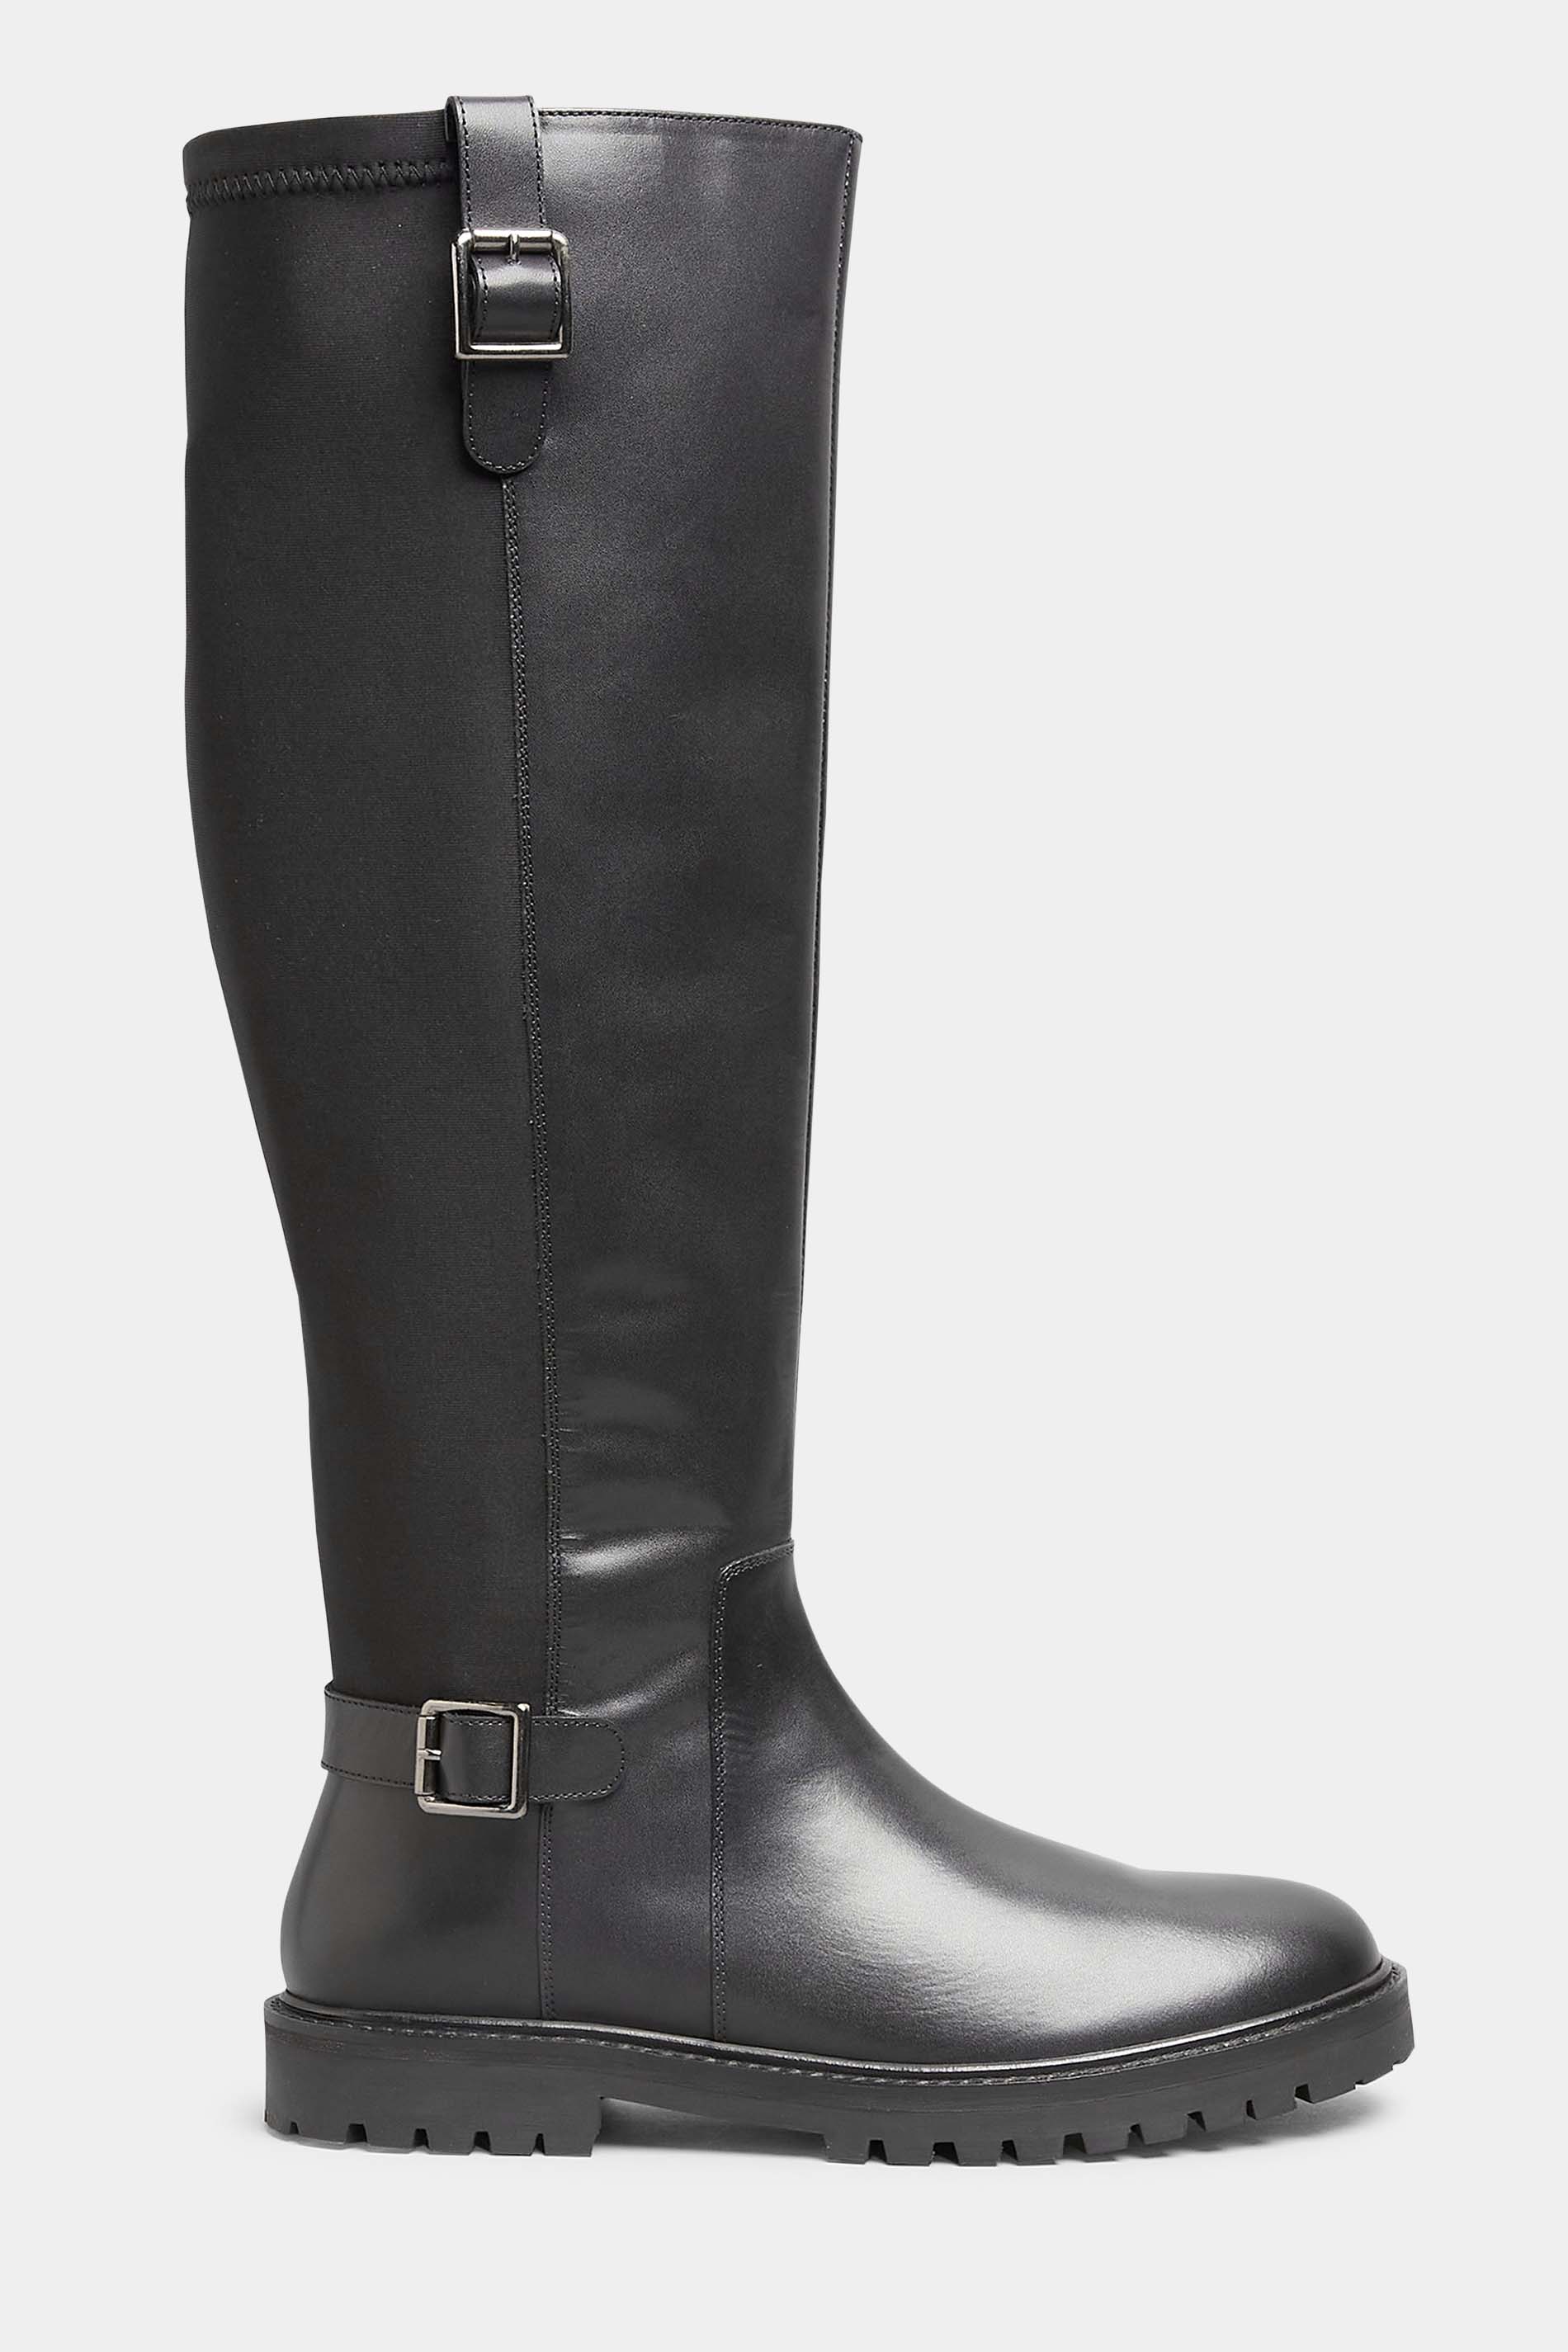 LTS Black Buckle Leather Knee High Boots In Standard Fit | Long Tall Sally 3